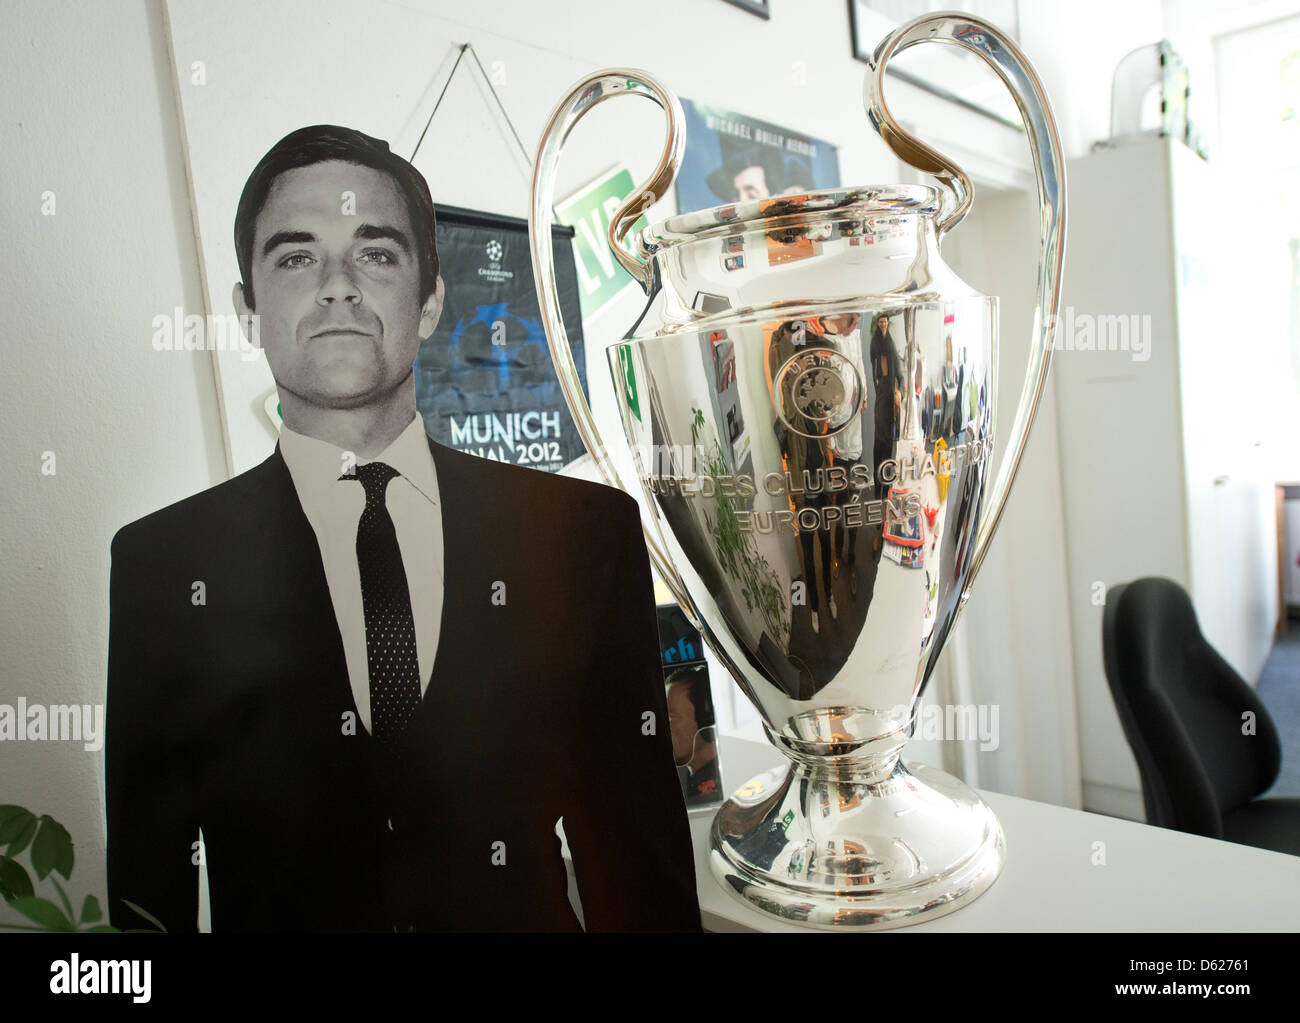 A cardboard cut-out of Robbie Williams stands net to the UEFA